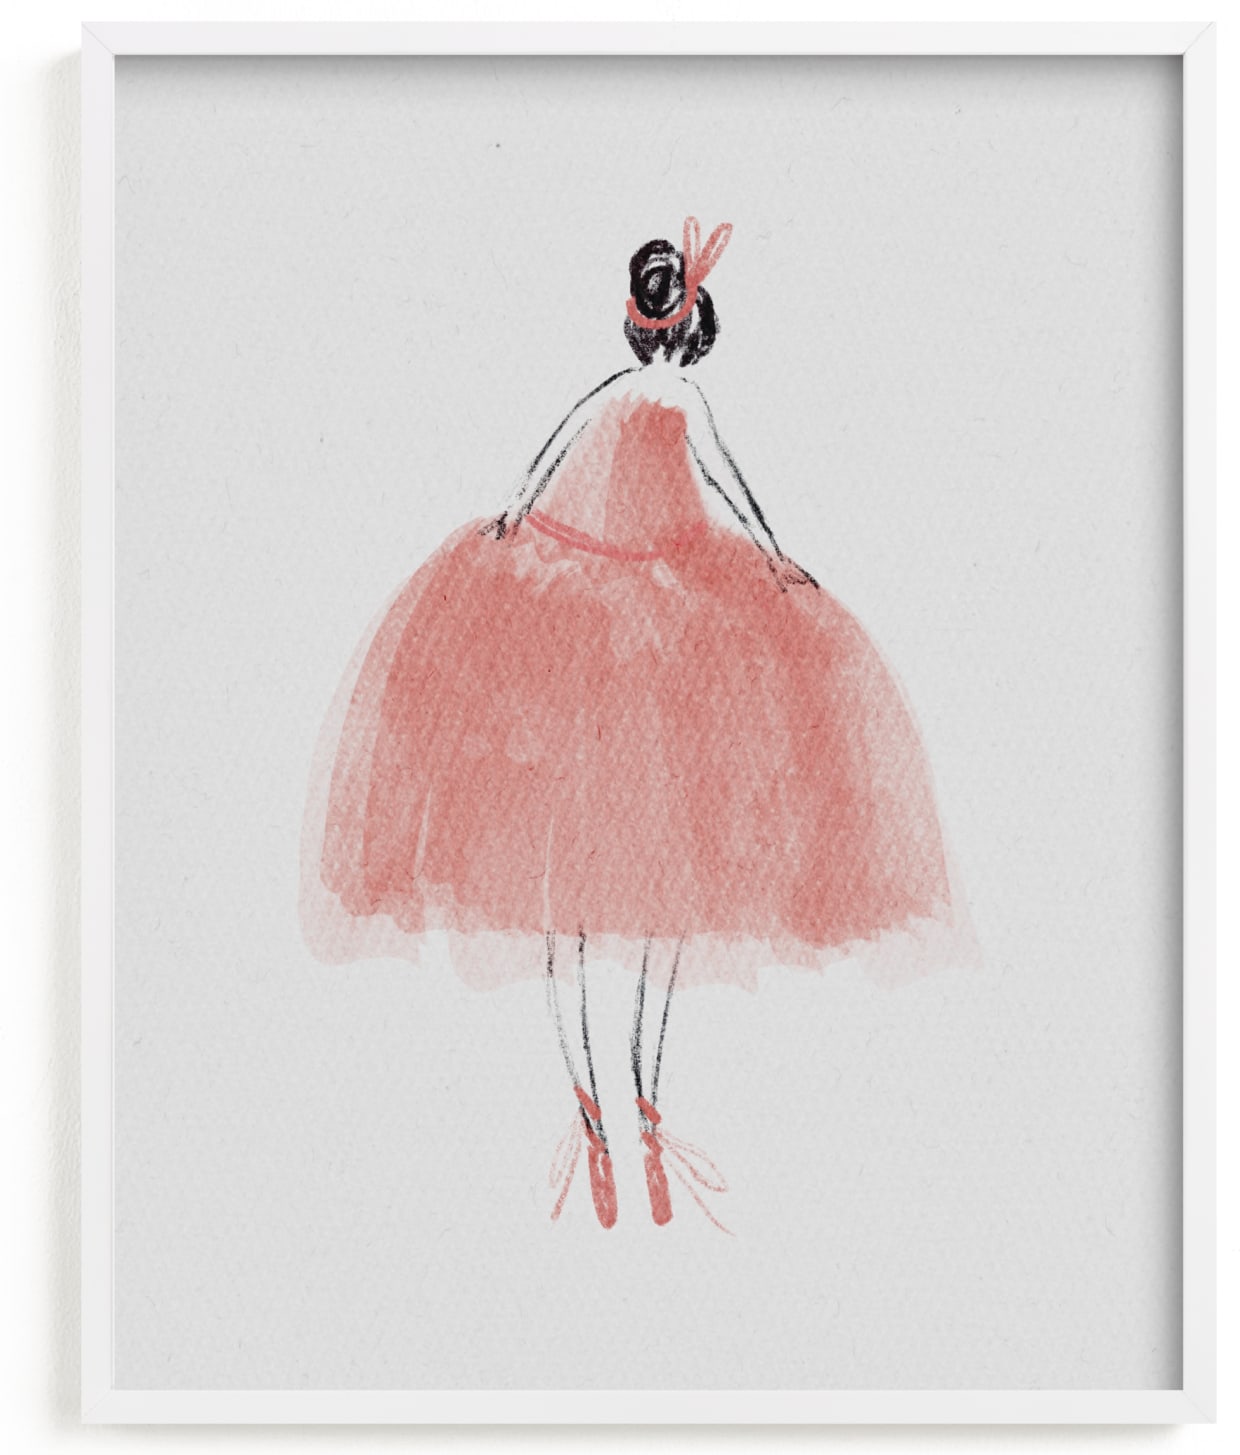 This is a colorful kids wall art by Grae called Painted Ballerina.